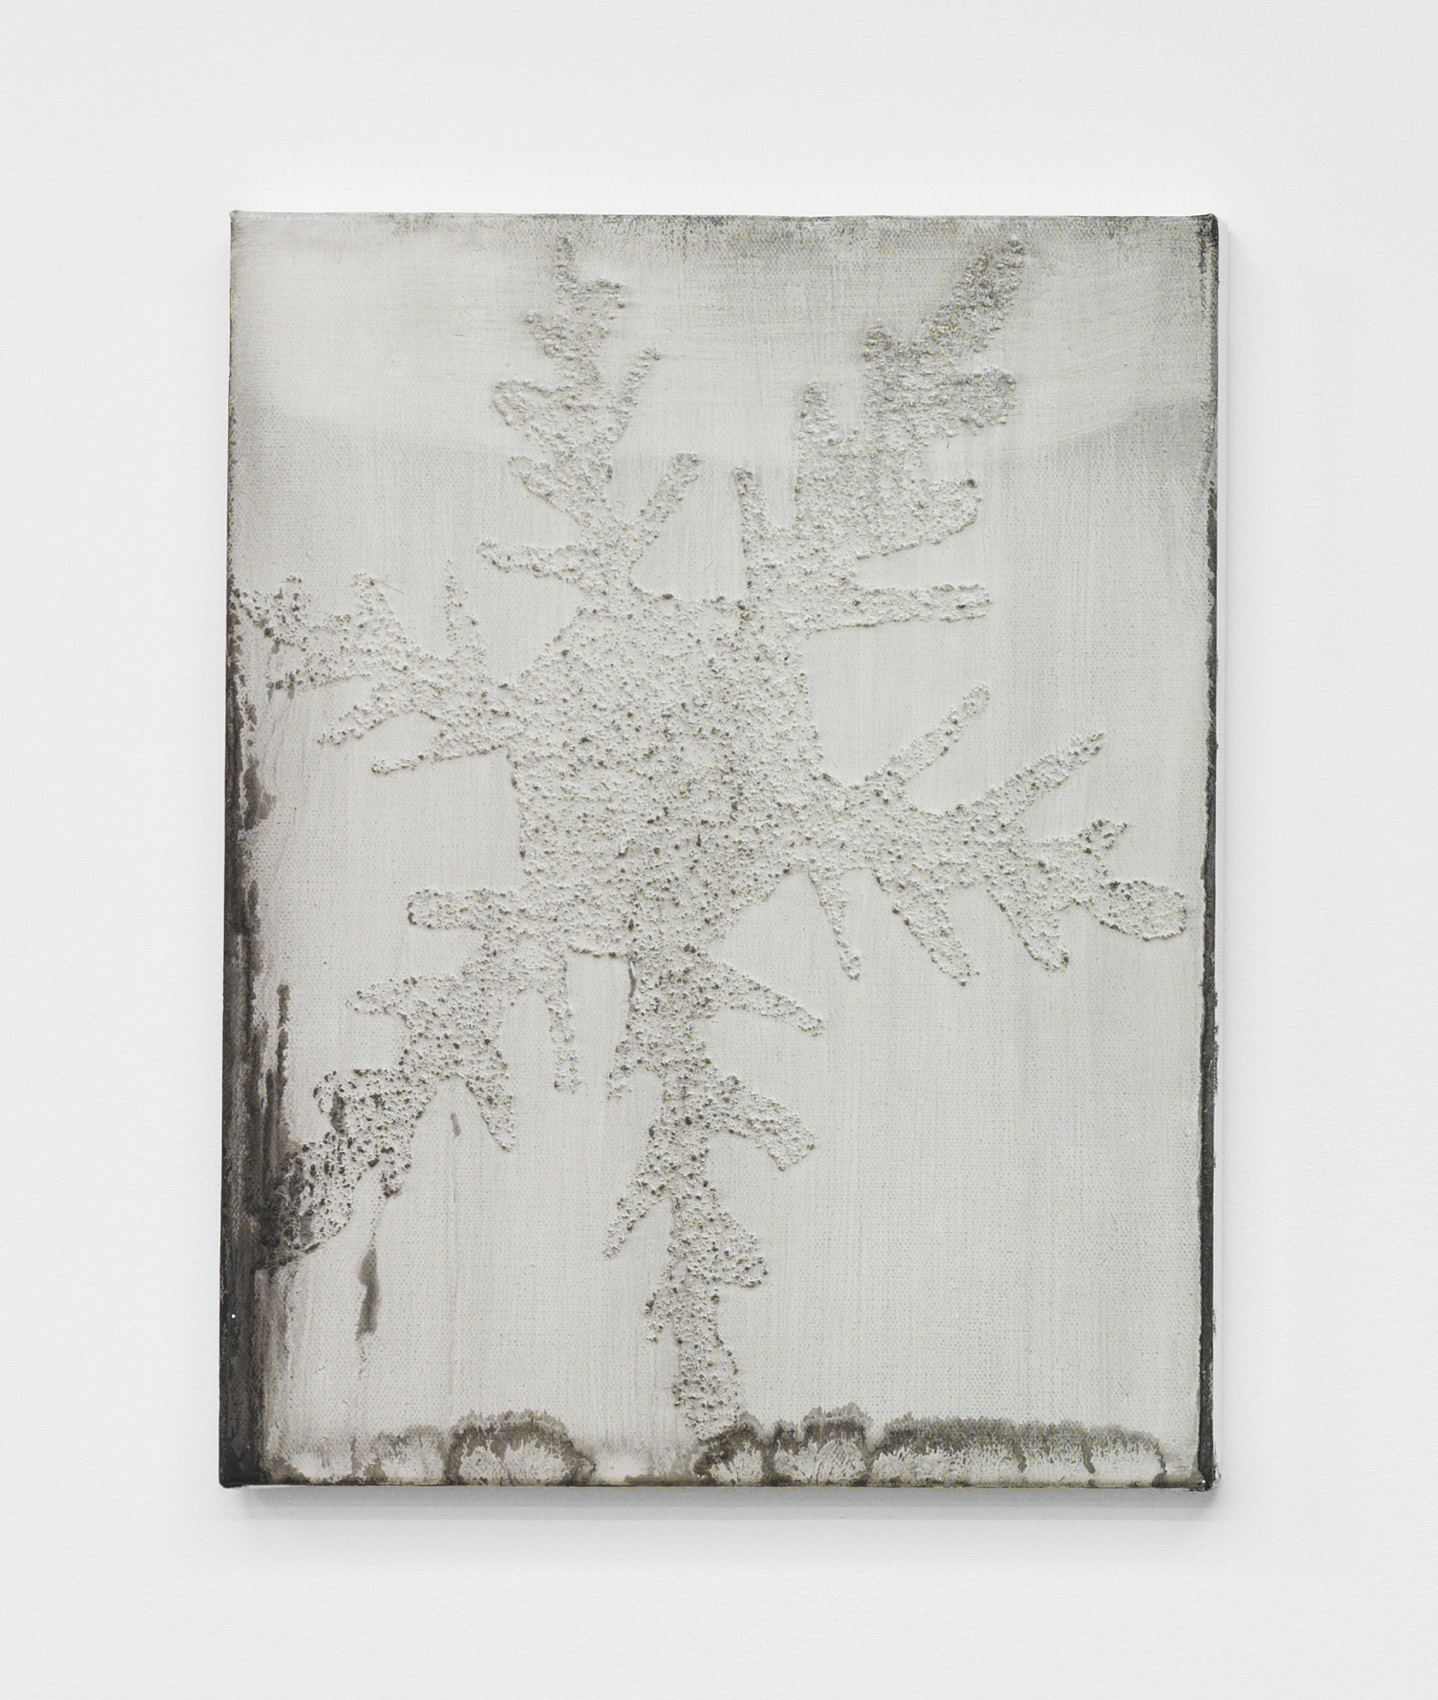 Alex Kwartler, Snowflake (I'm Nobody! Who are you?, for MA), 2018, oil and pumice on canvas, 14h x 11w in.